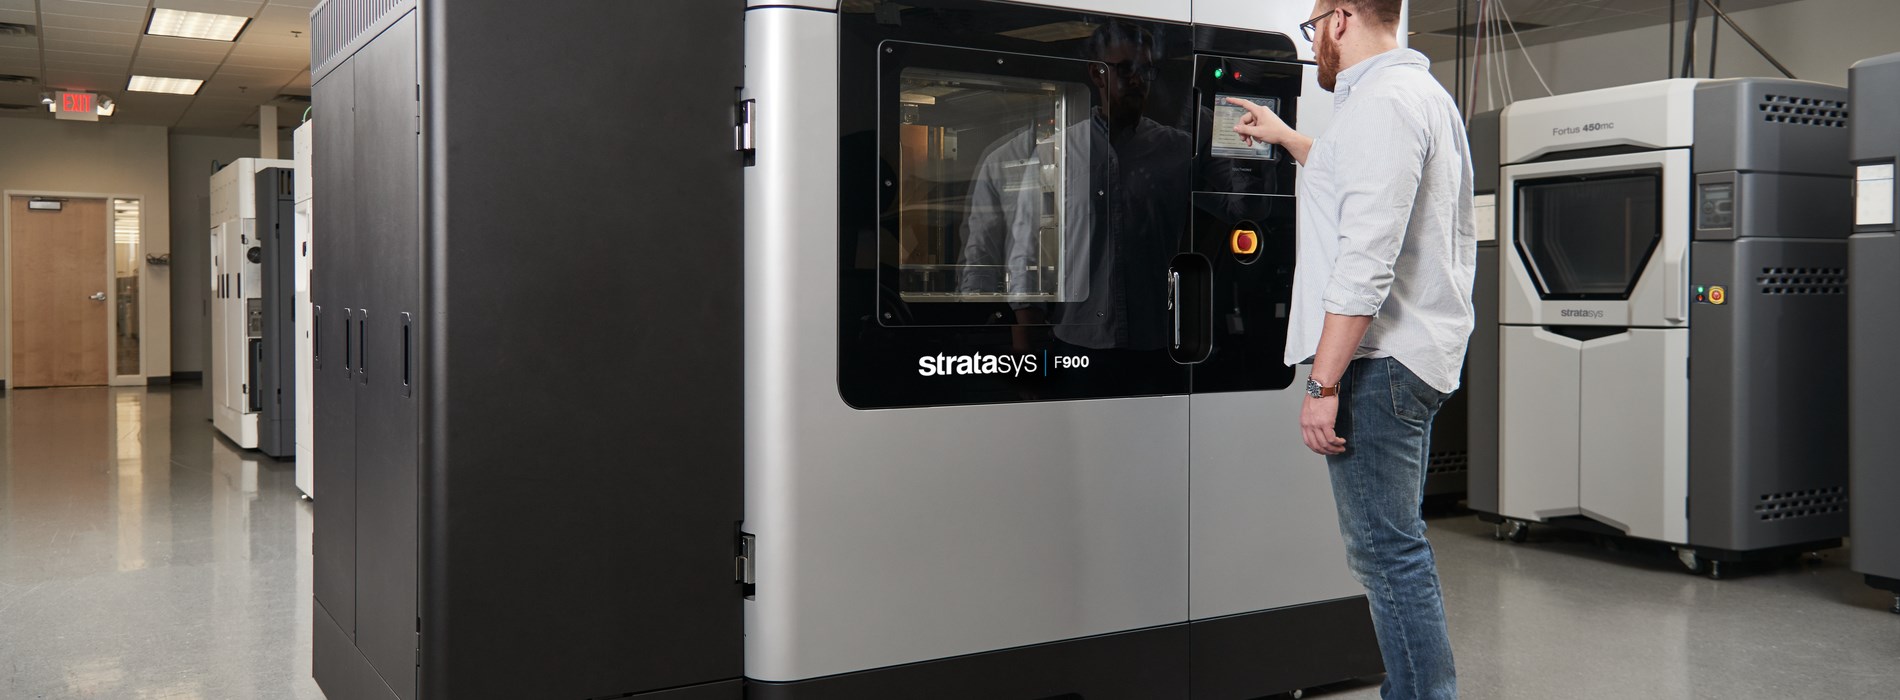 Tips on Running an Additive Manufacturing Environment